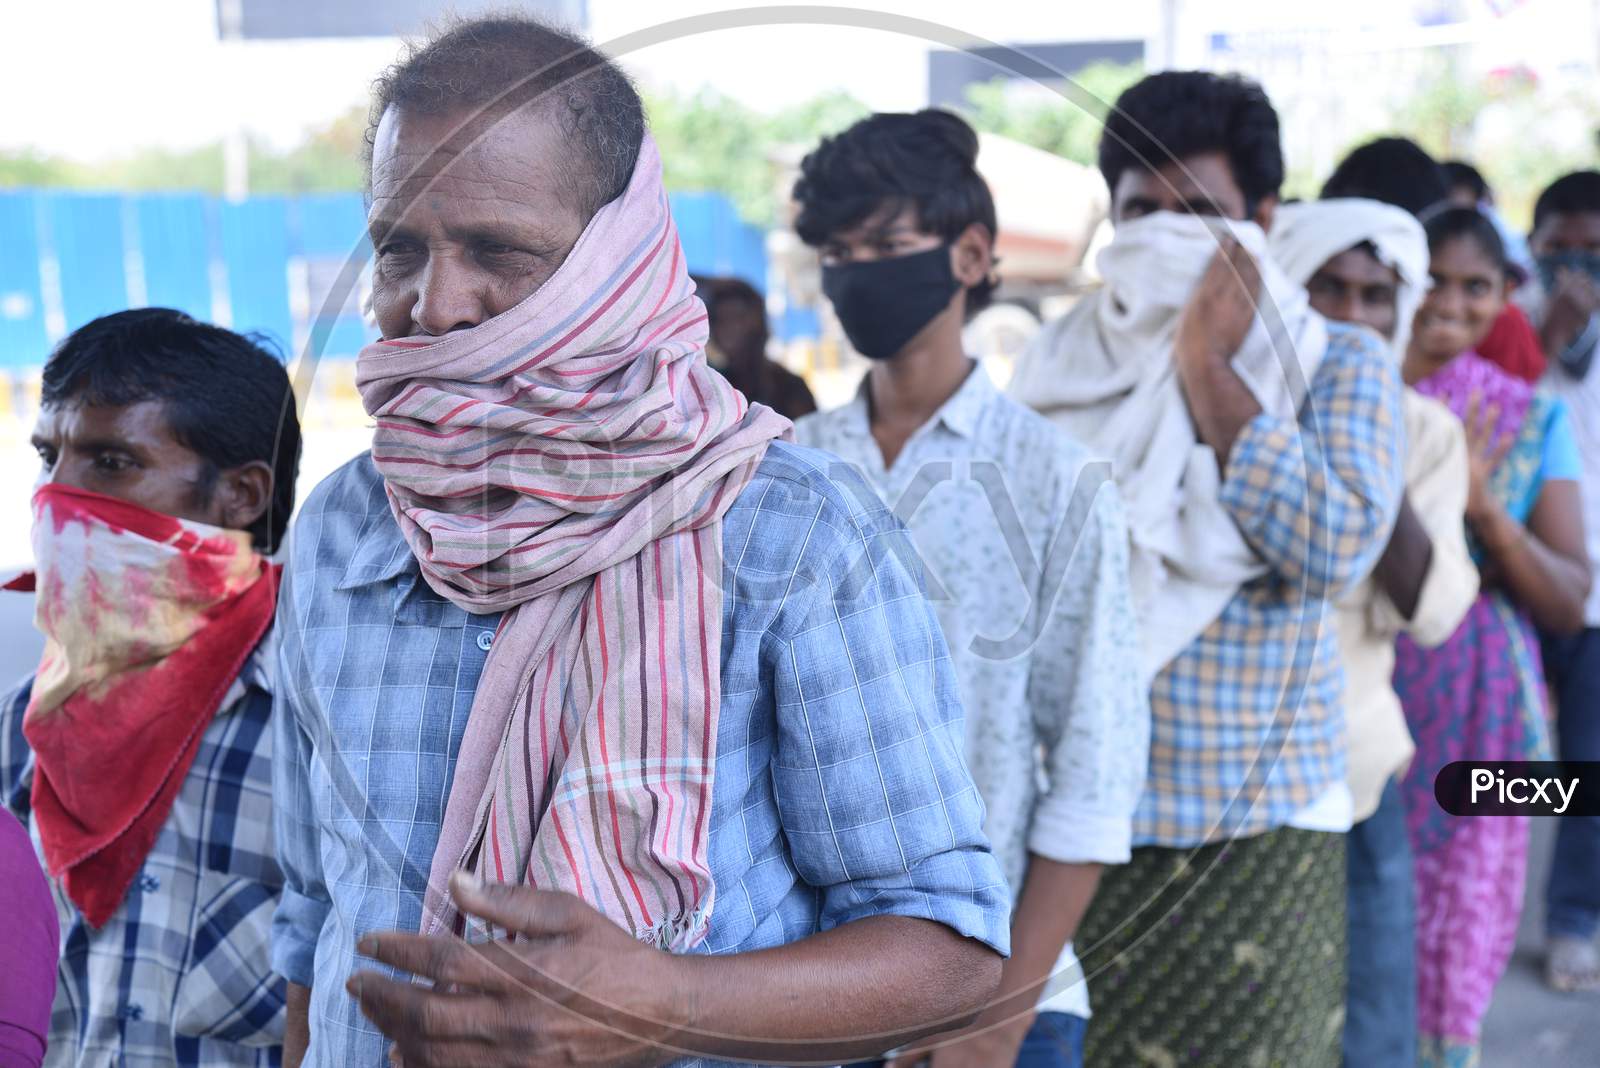 a migrant workers wait in line to collect food packets being distributed by some donors as they couldn't find food and work during nationwide lockdown amid coronavirus pandemic, April 8,2020, Hyderabad.